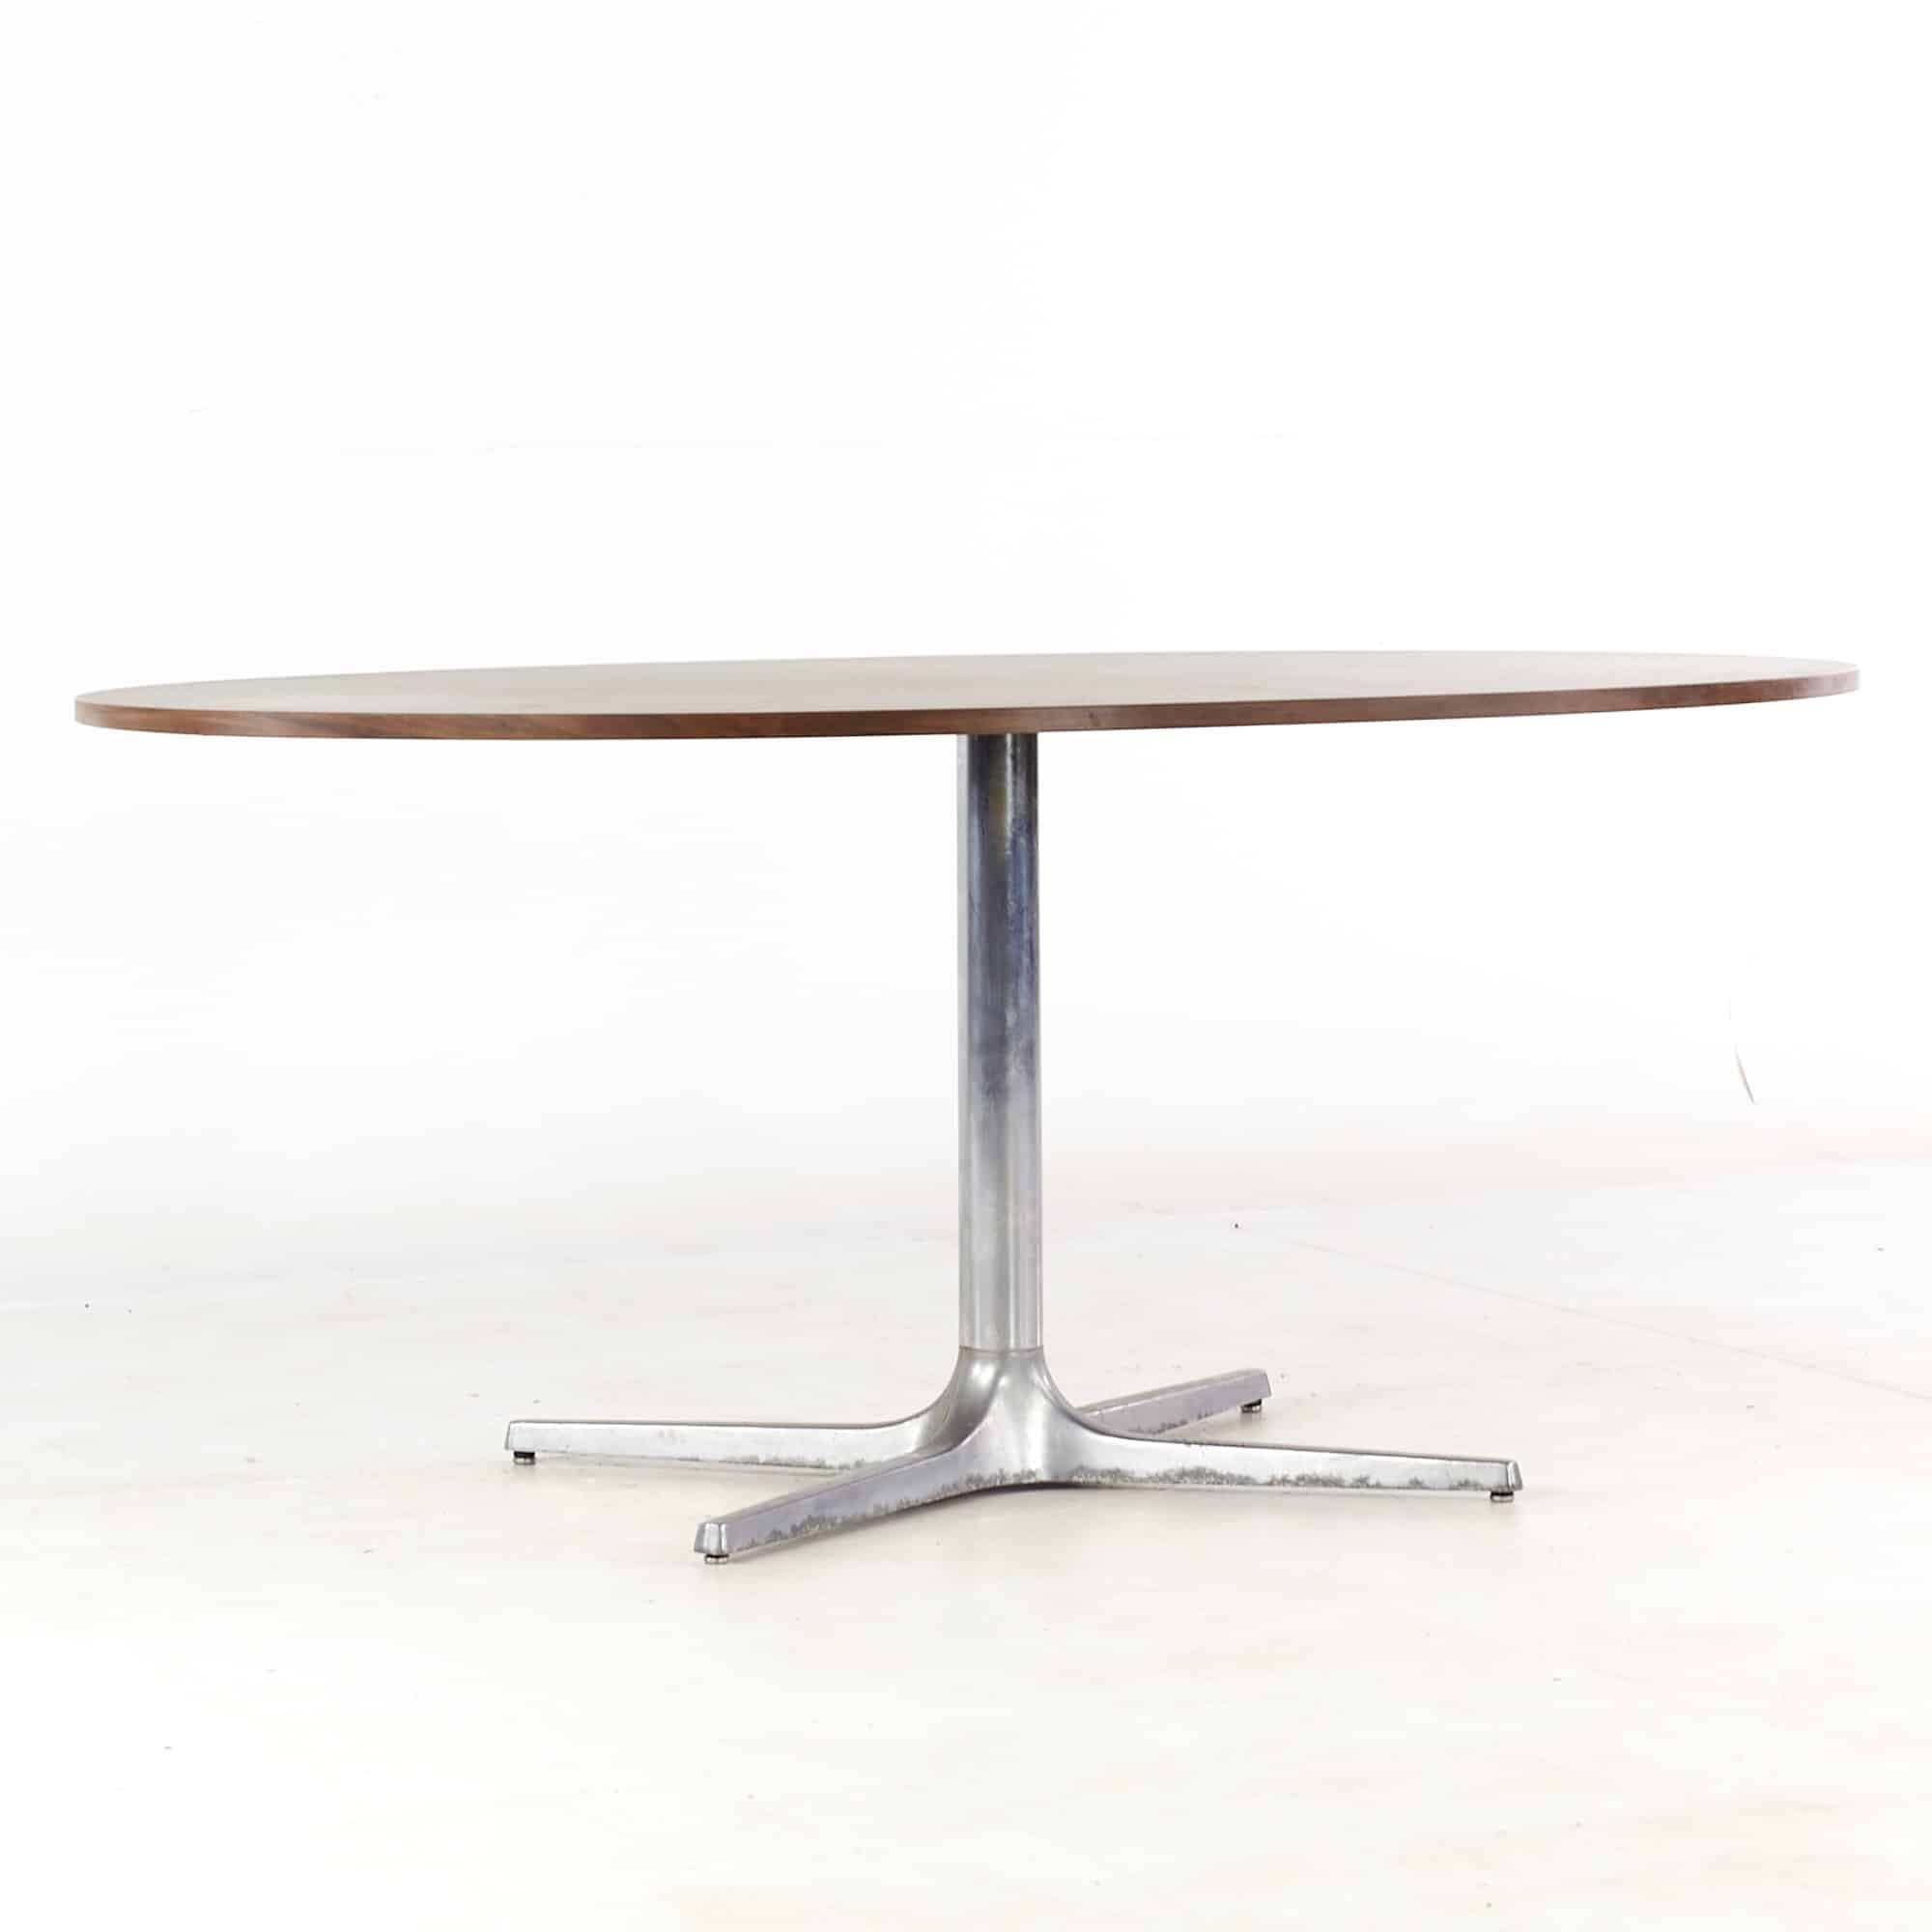 Chromcraft Mid Century Dining Table with Knoll Style Laminate Top